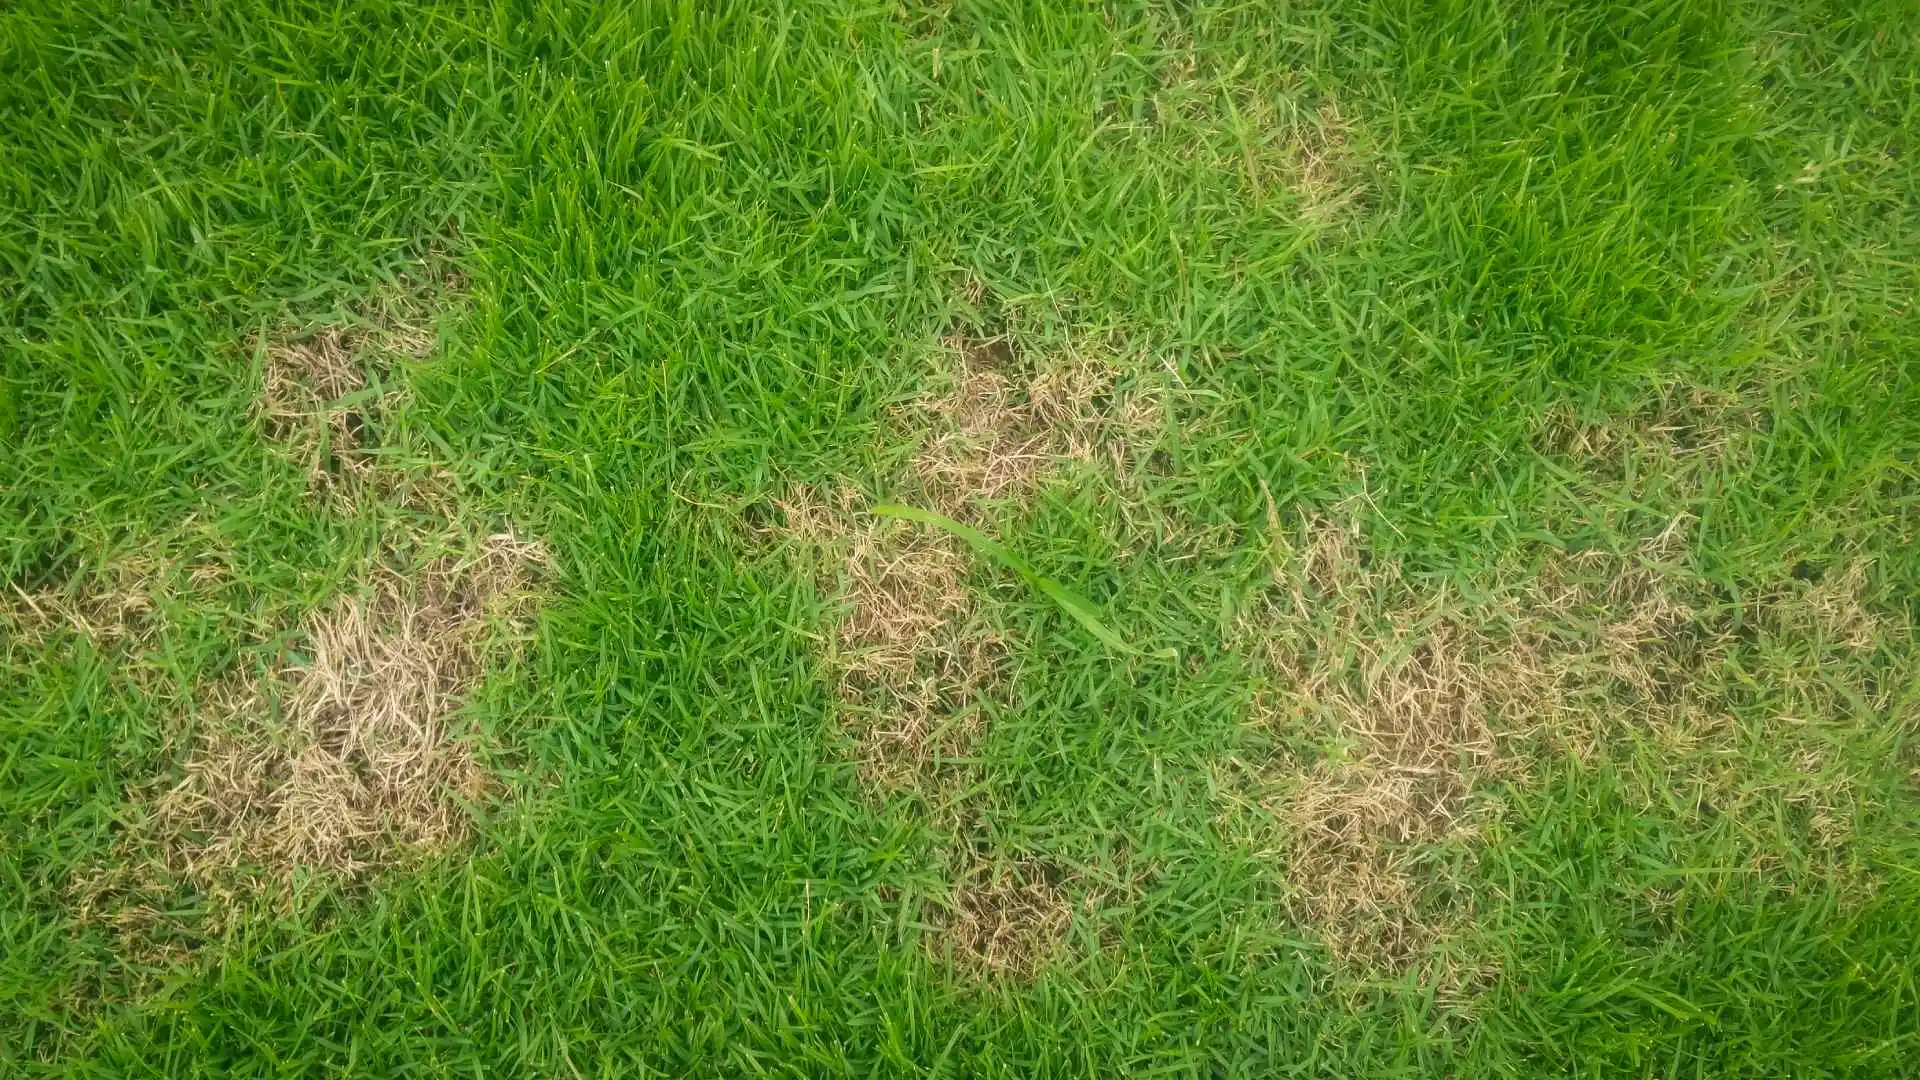 Necrotic ring spot lawn disease found in client's lawn in Des Moines, IA.